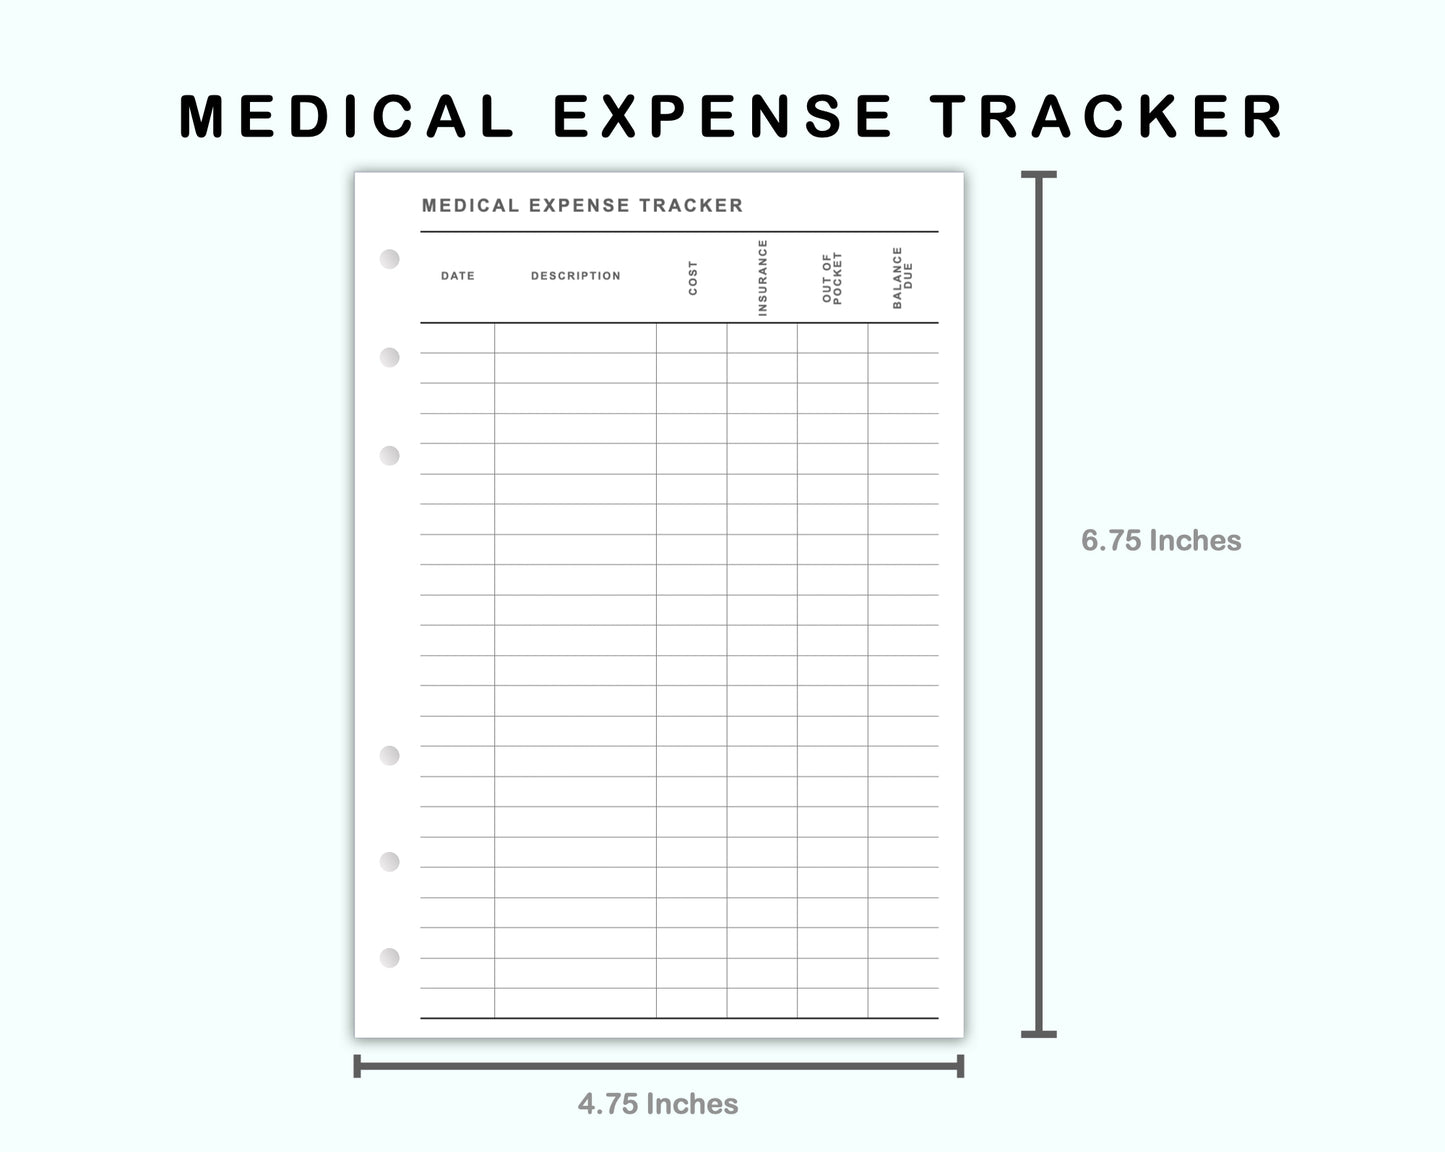 Personal Wide Inserts - Medical Expense Tracker